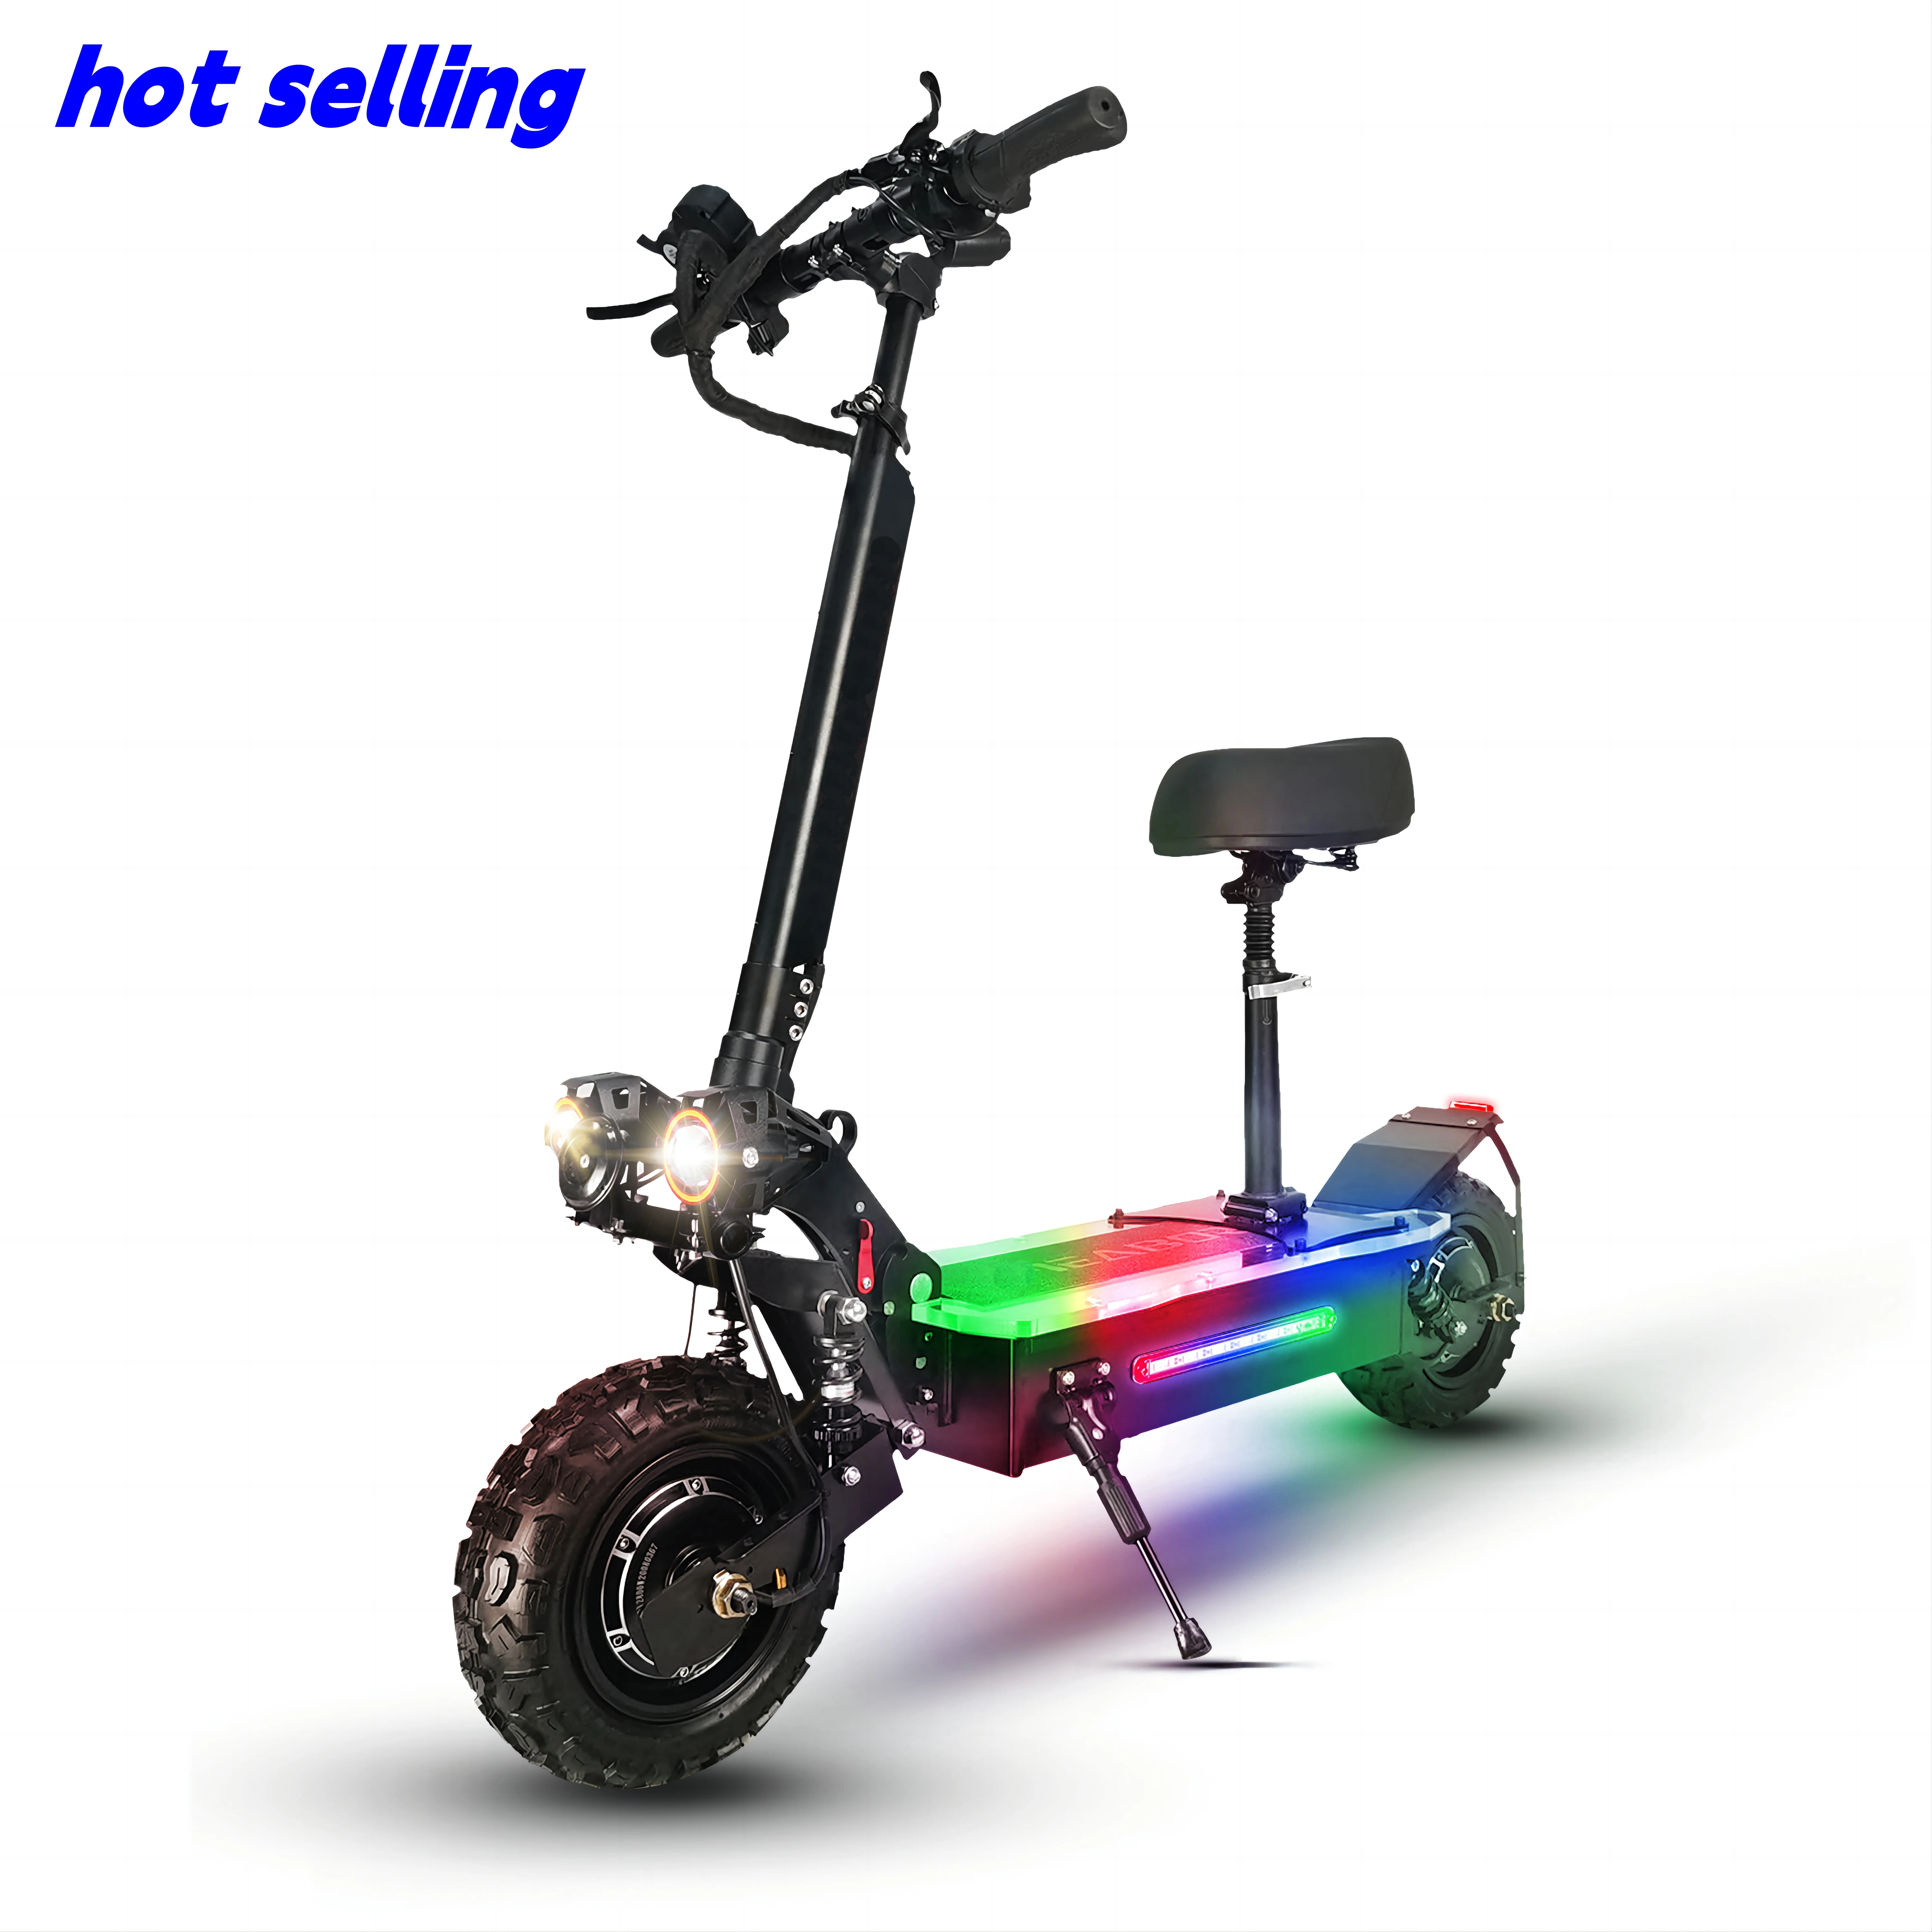 

Powerful 11 inch wheels max speed 70-80km/h 5600w 27Ah dual motor 60v foldable electric adult scooter with acrylic LED light